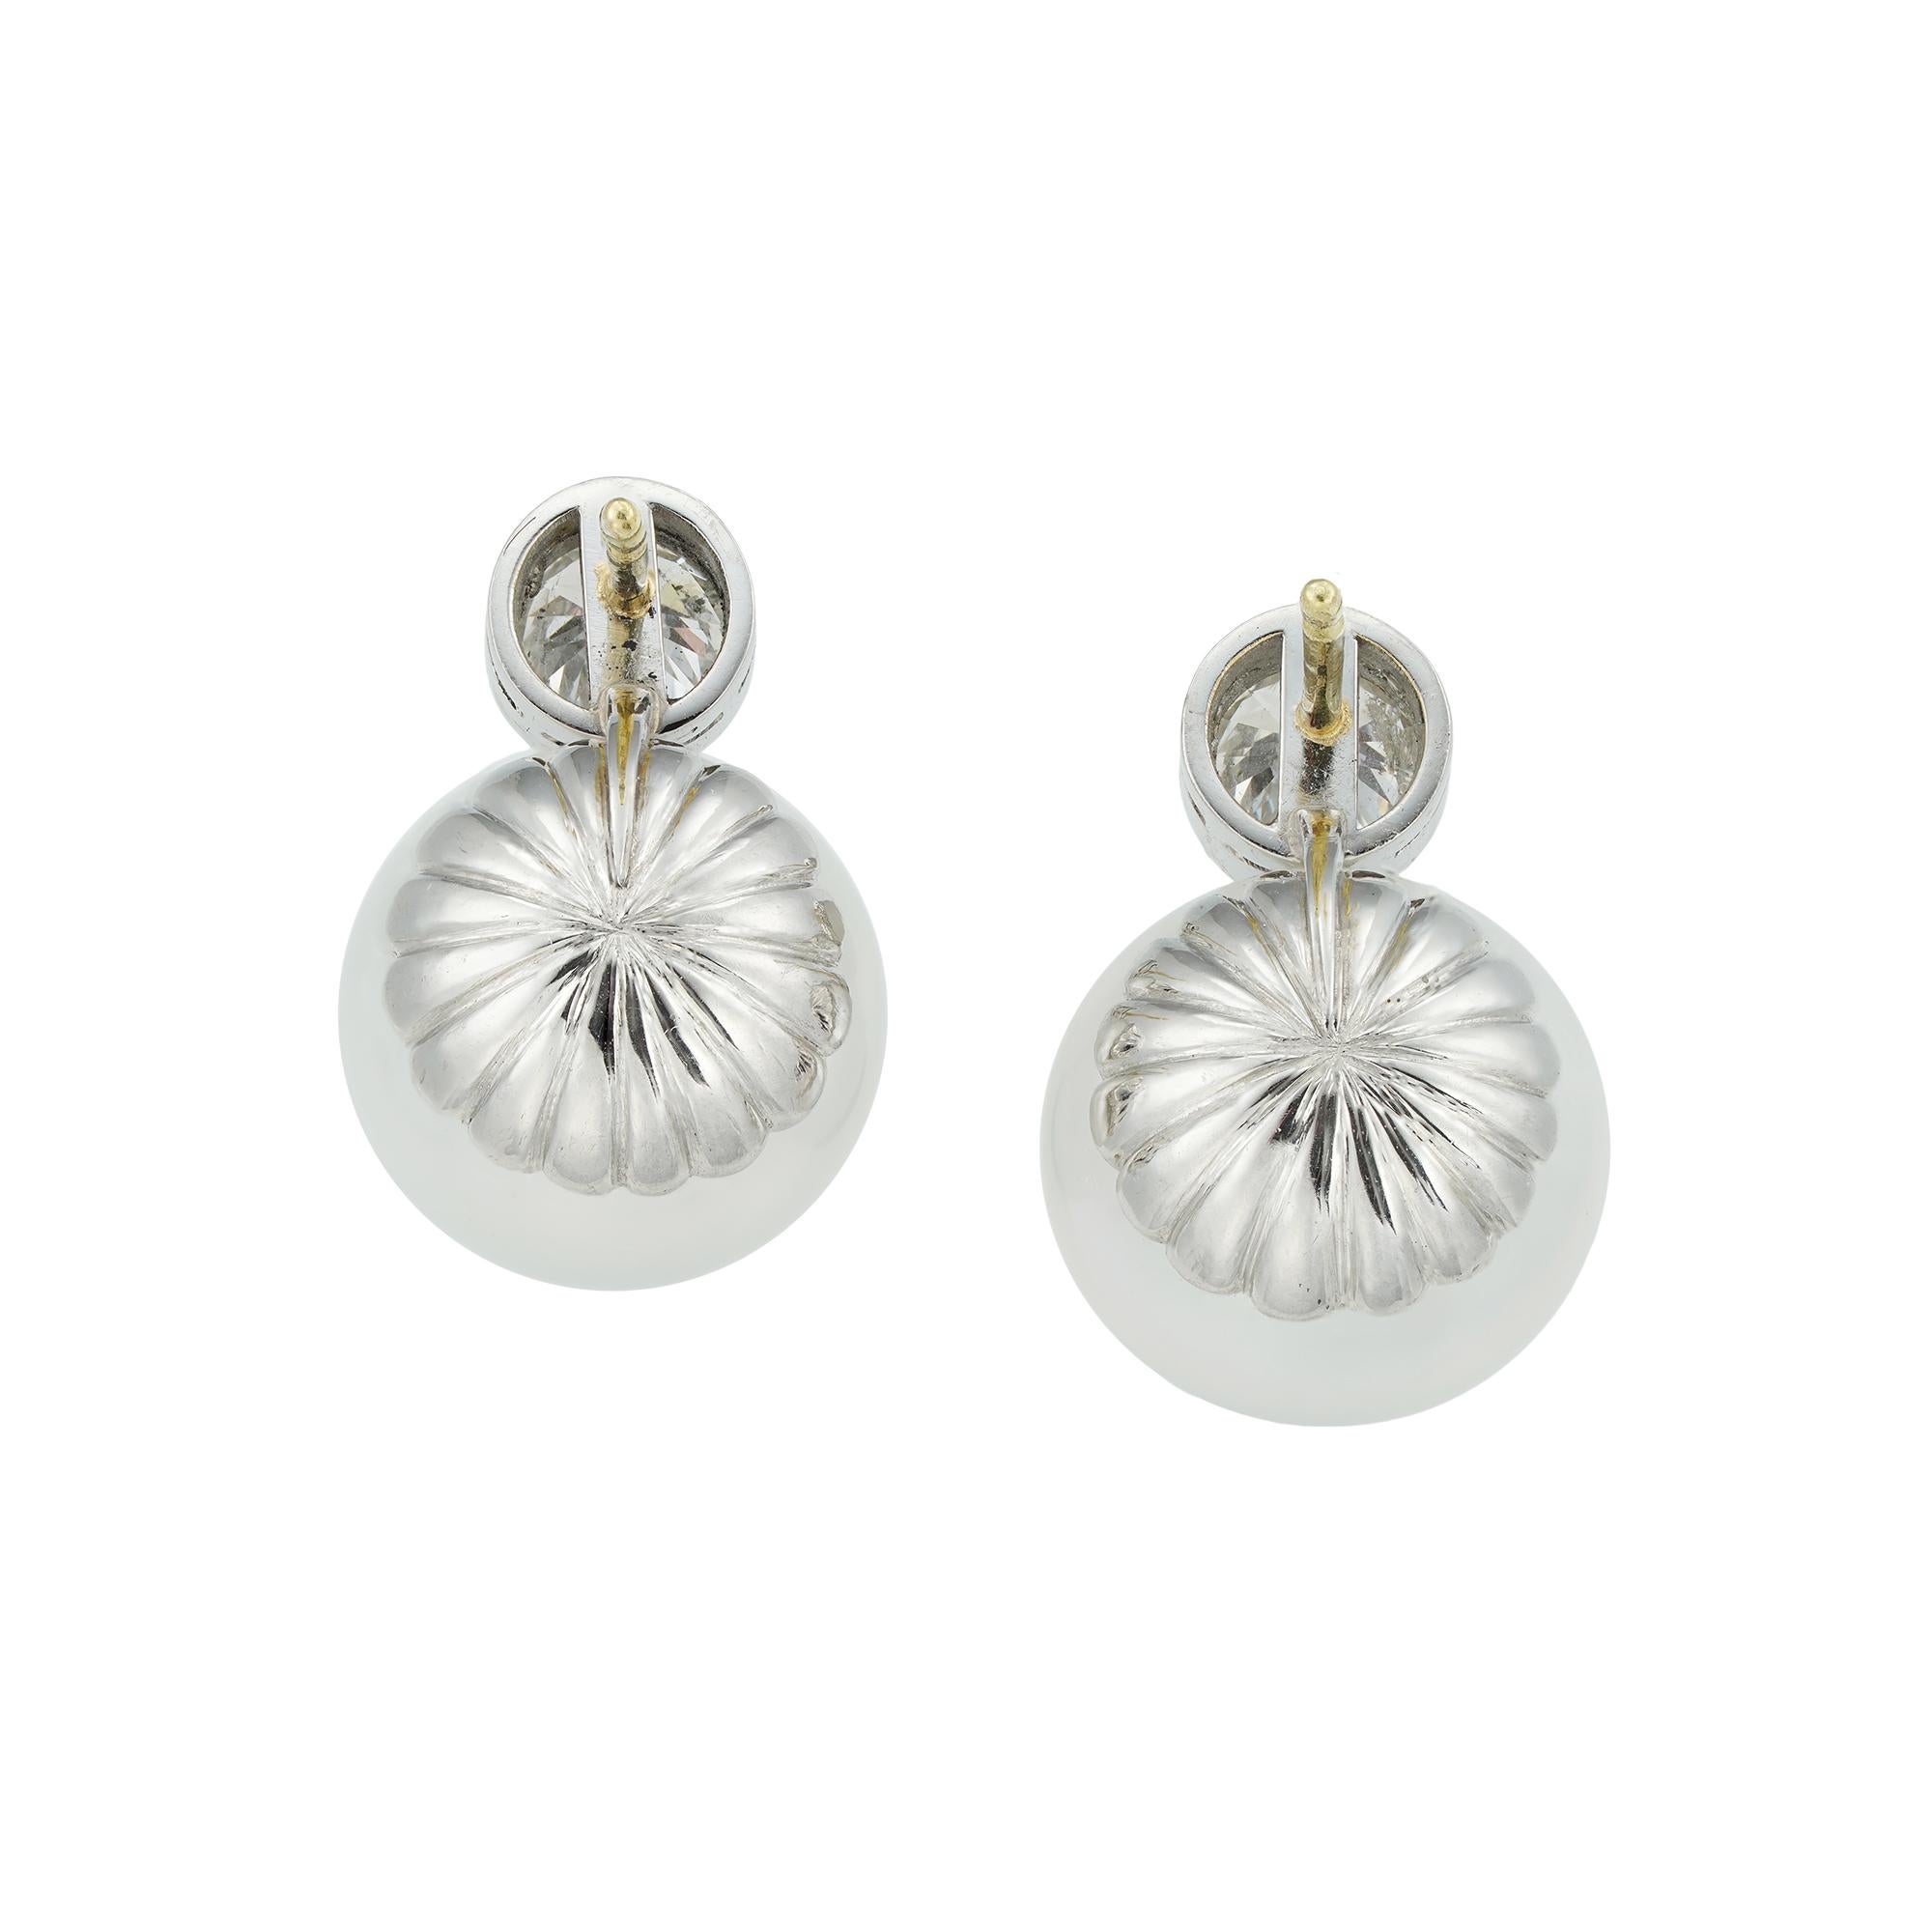 A pair of South Sea cultured pearl and diamond earrings, each earring with a single old brilliant-cut diamond top, the one diamond weighing 0.90 carats and the other 0.91 carats, assessed to be of I-J colour and SI2-I1 clarity, each millegrain-set